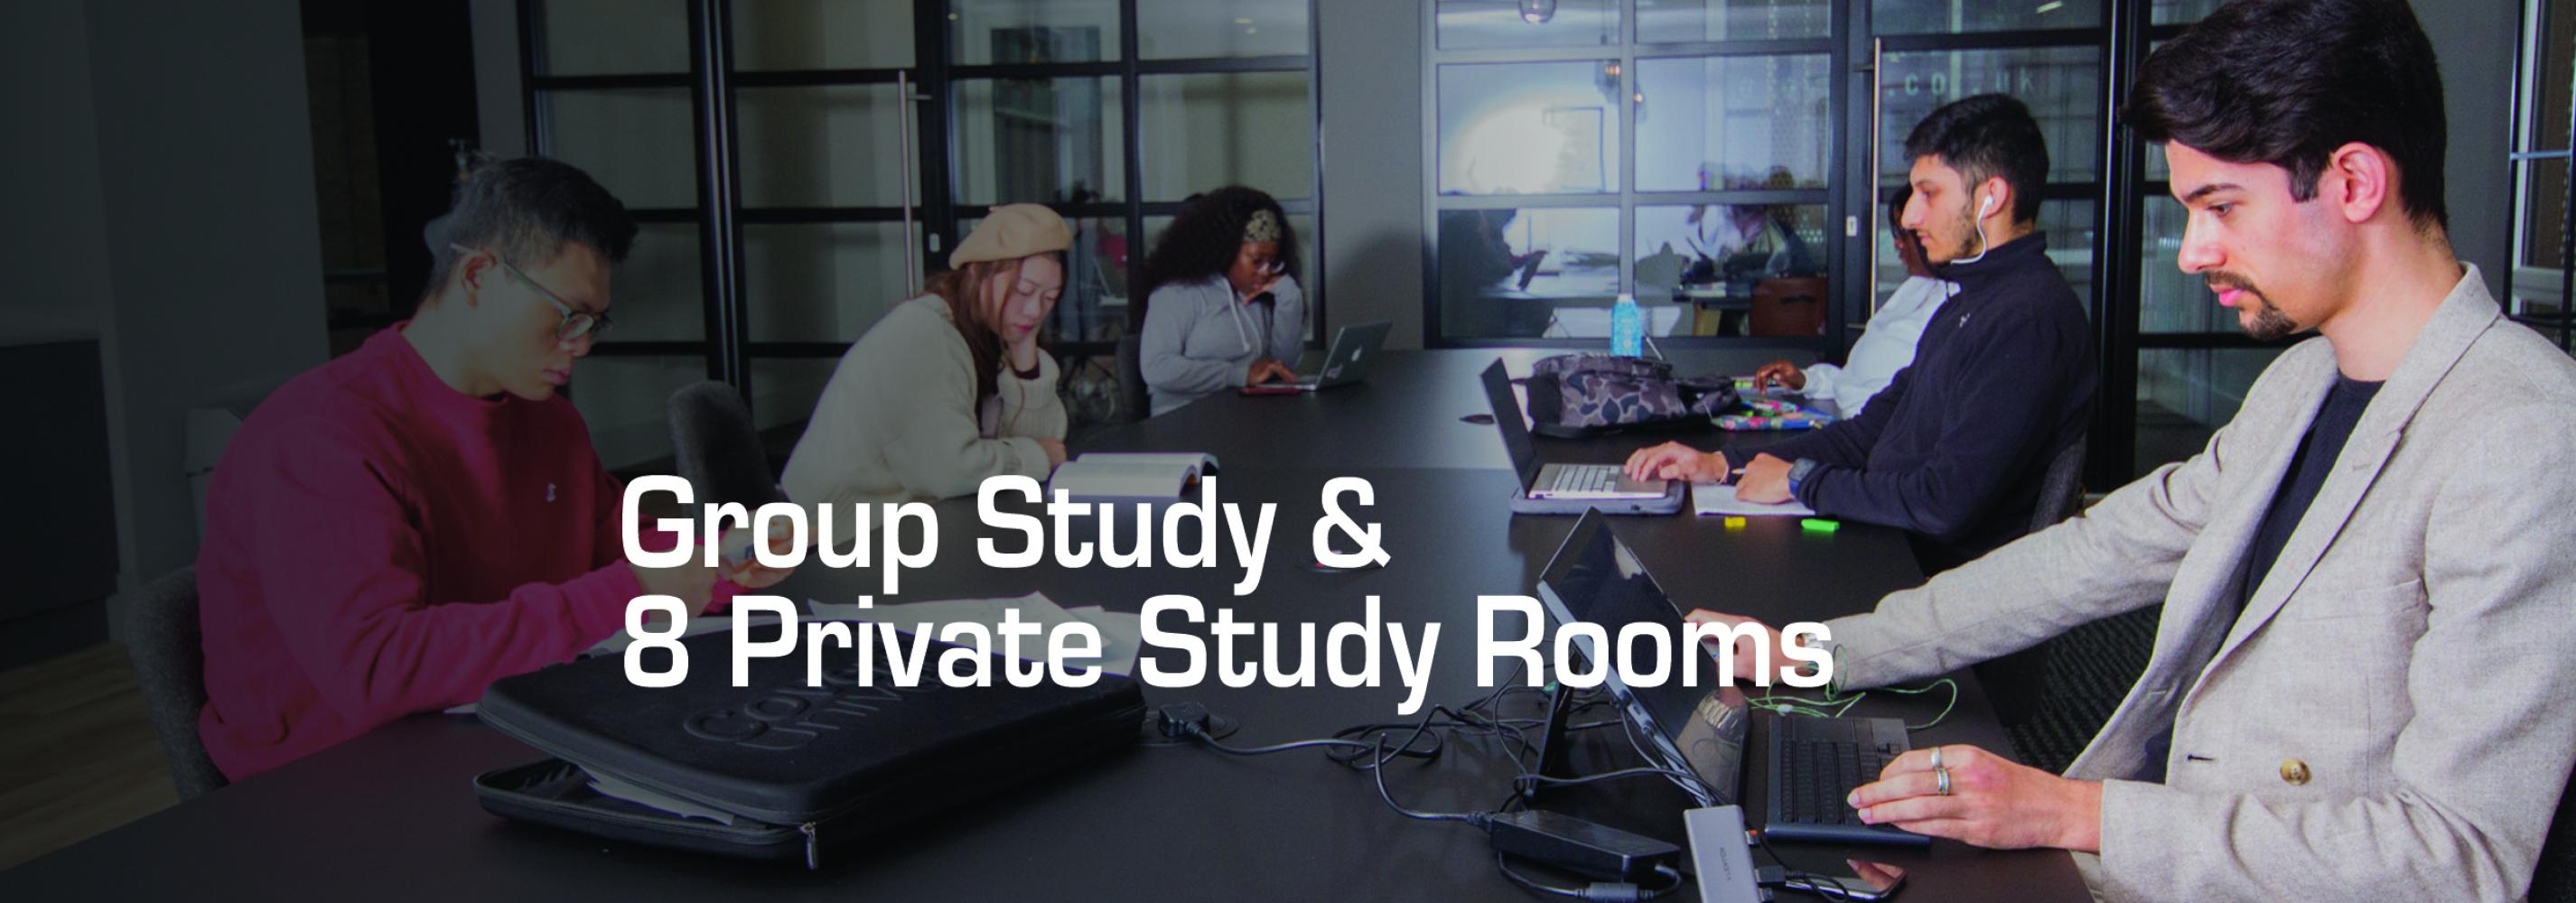 Work in our group study spaces or in one of the 8 private study rooms